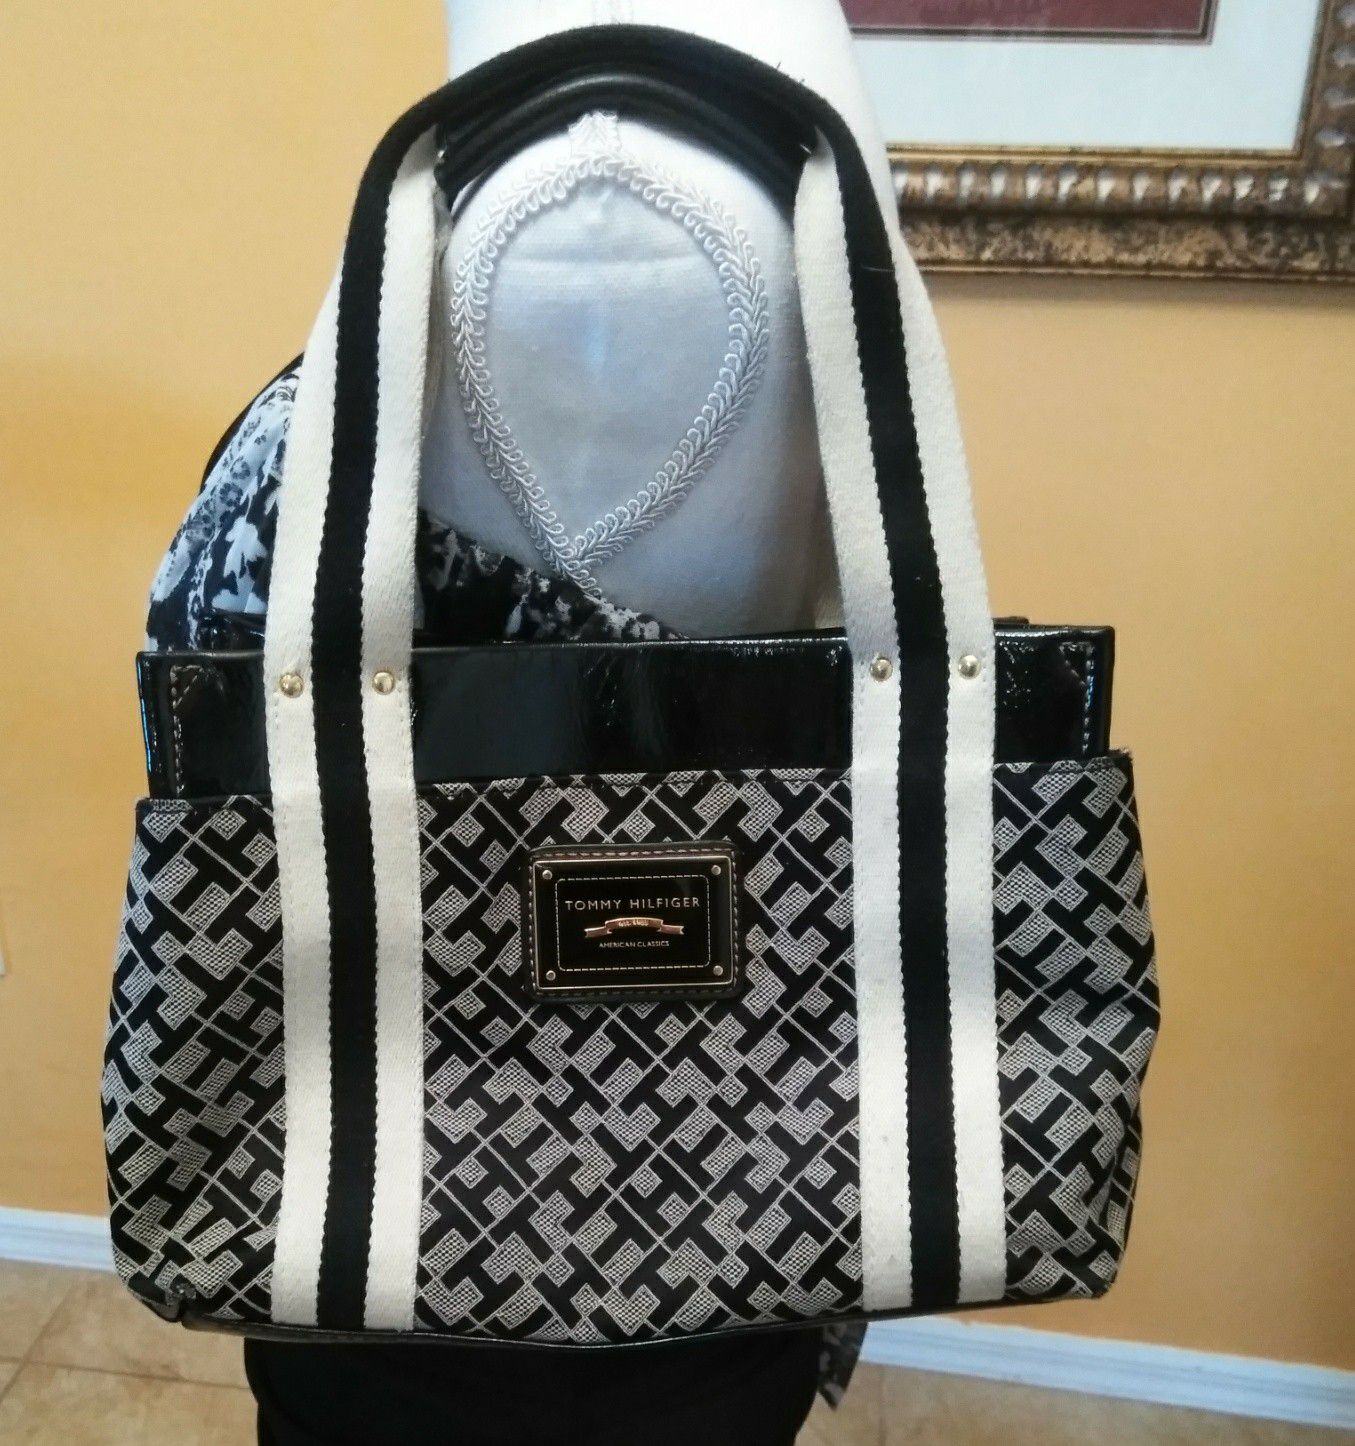 tykkelse føle Fredag Tommy Hilfiger Logo Canvas American Classics Black and White Handbag Purse  for Sale in Cape Coral, FL - OfferUp